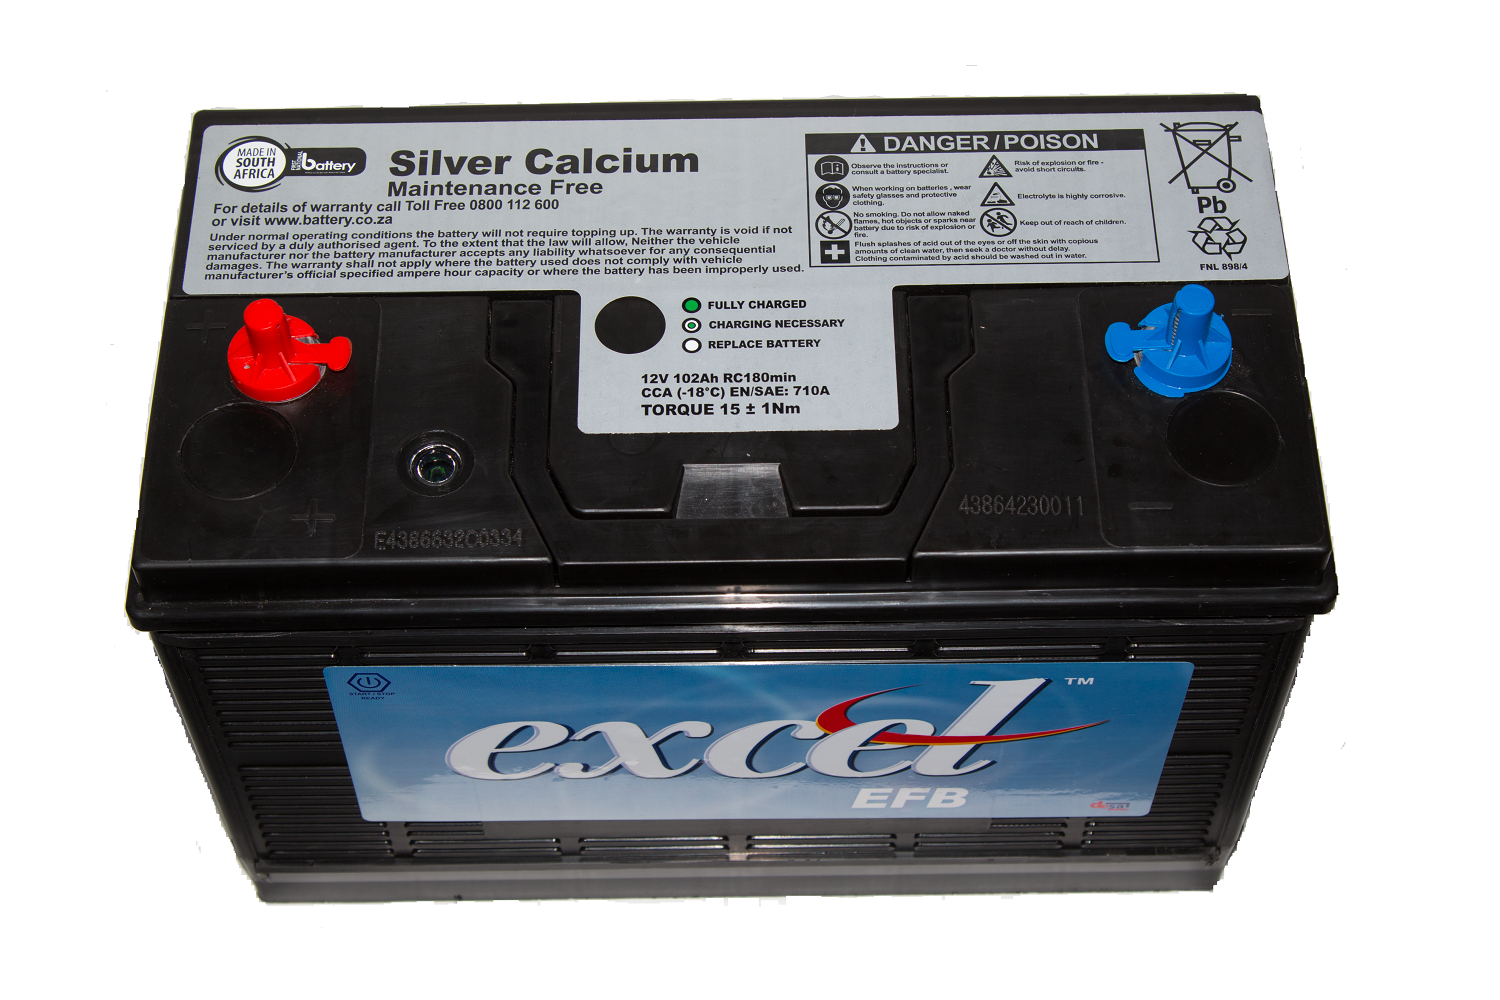 12 volt deep cycle battery for rv